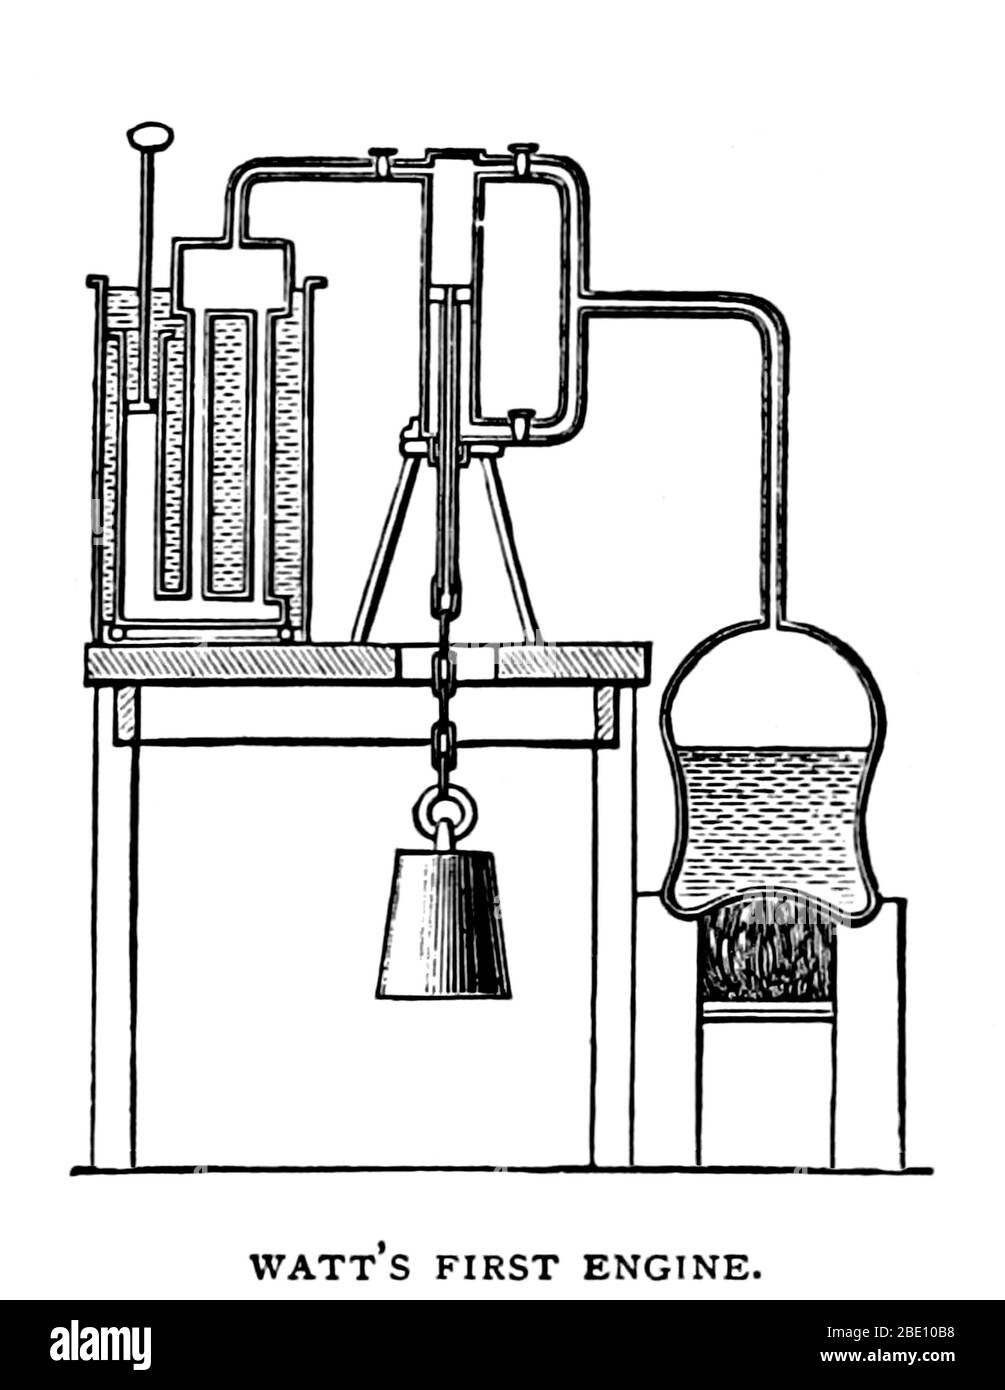 Watts' first steam engine illustration taken from page 114 of 'George Square, Glasgow; and the lives of those whom its statues commemorate, etc' by Thomas (of Glascow) Somerville, 1891. The Watt steam engine (alternatively known as the Boulton and Watt steam engine) was the first type of steam engine to make use of steam at a pressure just above atmospheric to drive the piston helped by a partial vacuum. Improving on the design of the 1712 Newcomen engine, the Watt steam engine, developed sporadically from 1763 to 1775, was the next great step in the development of the steam engine. Watt's two Stock Photo